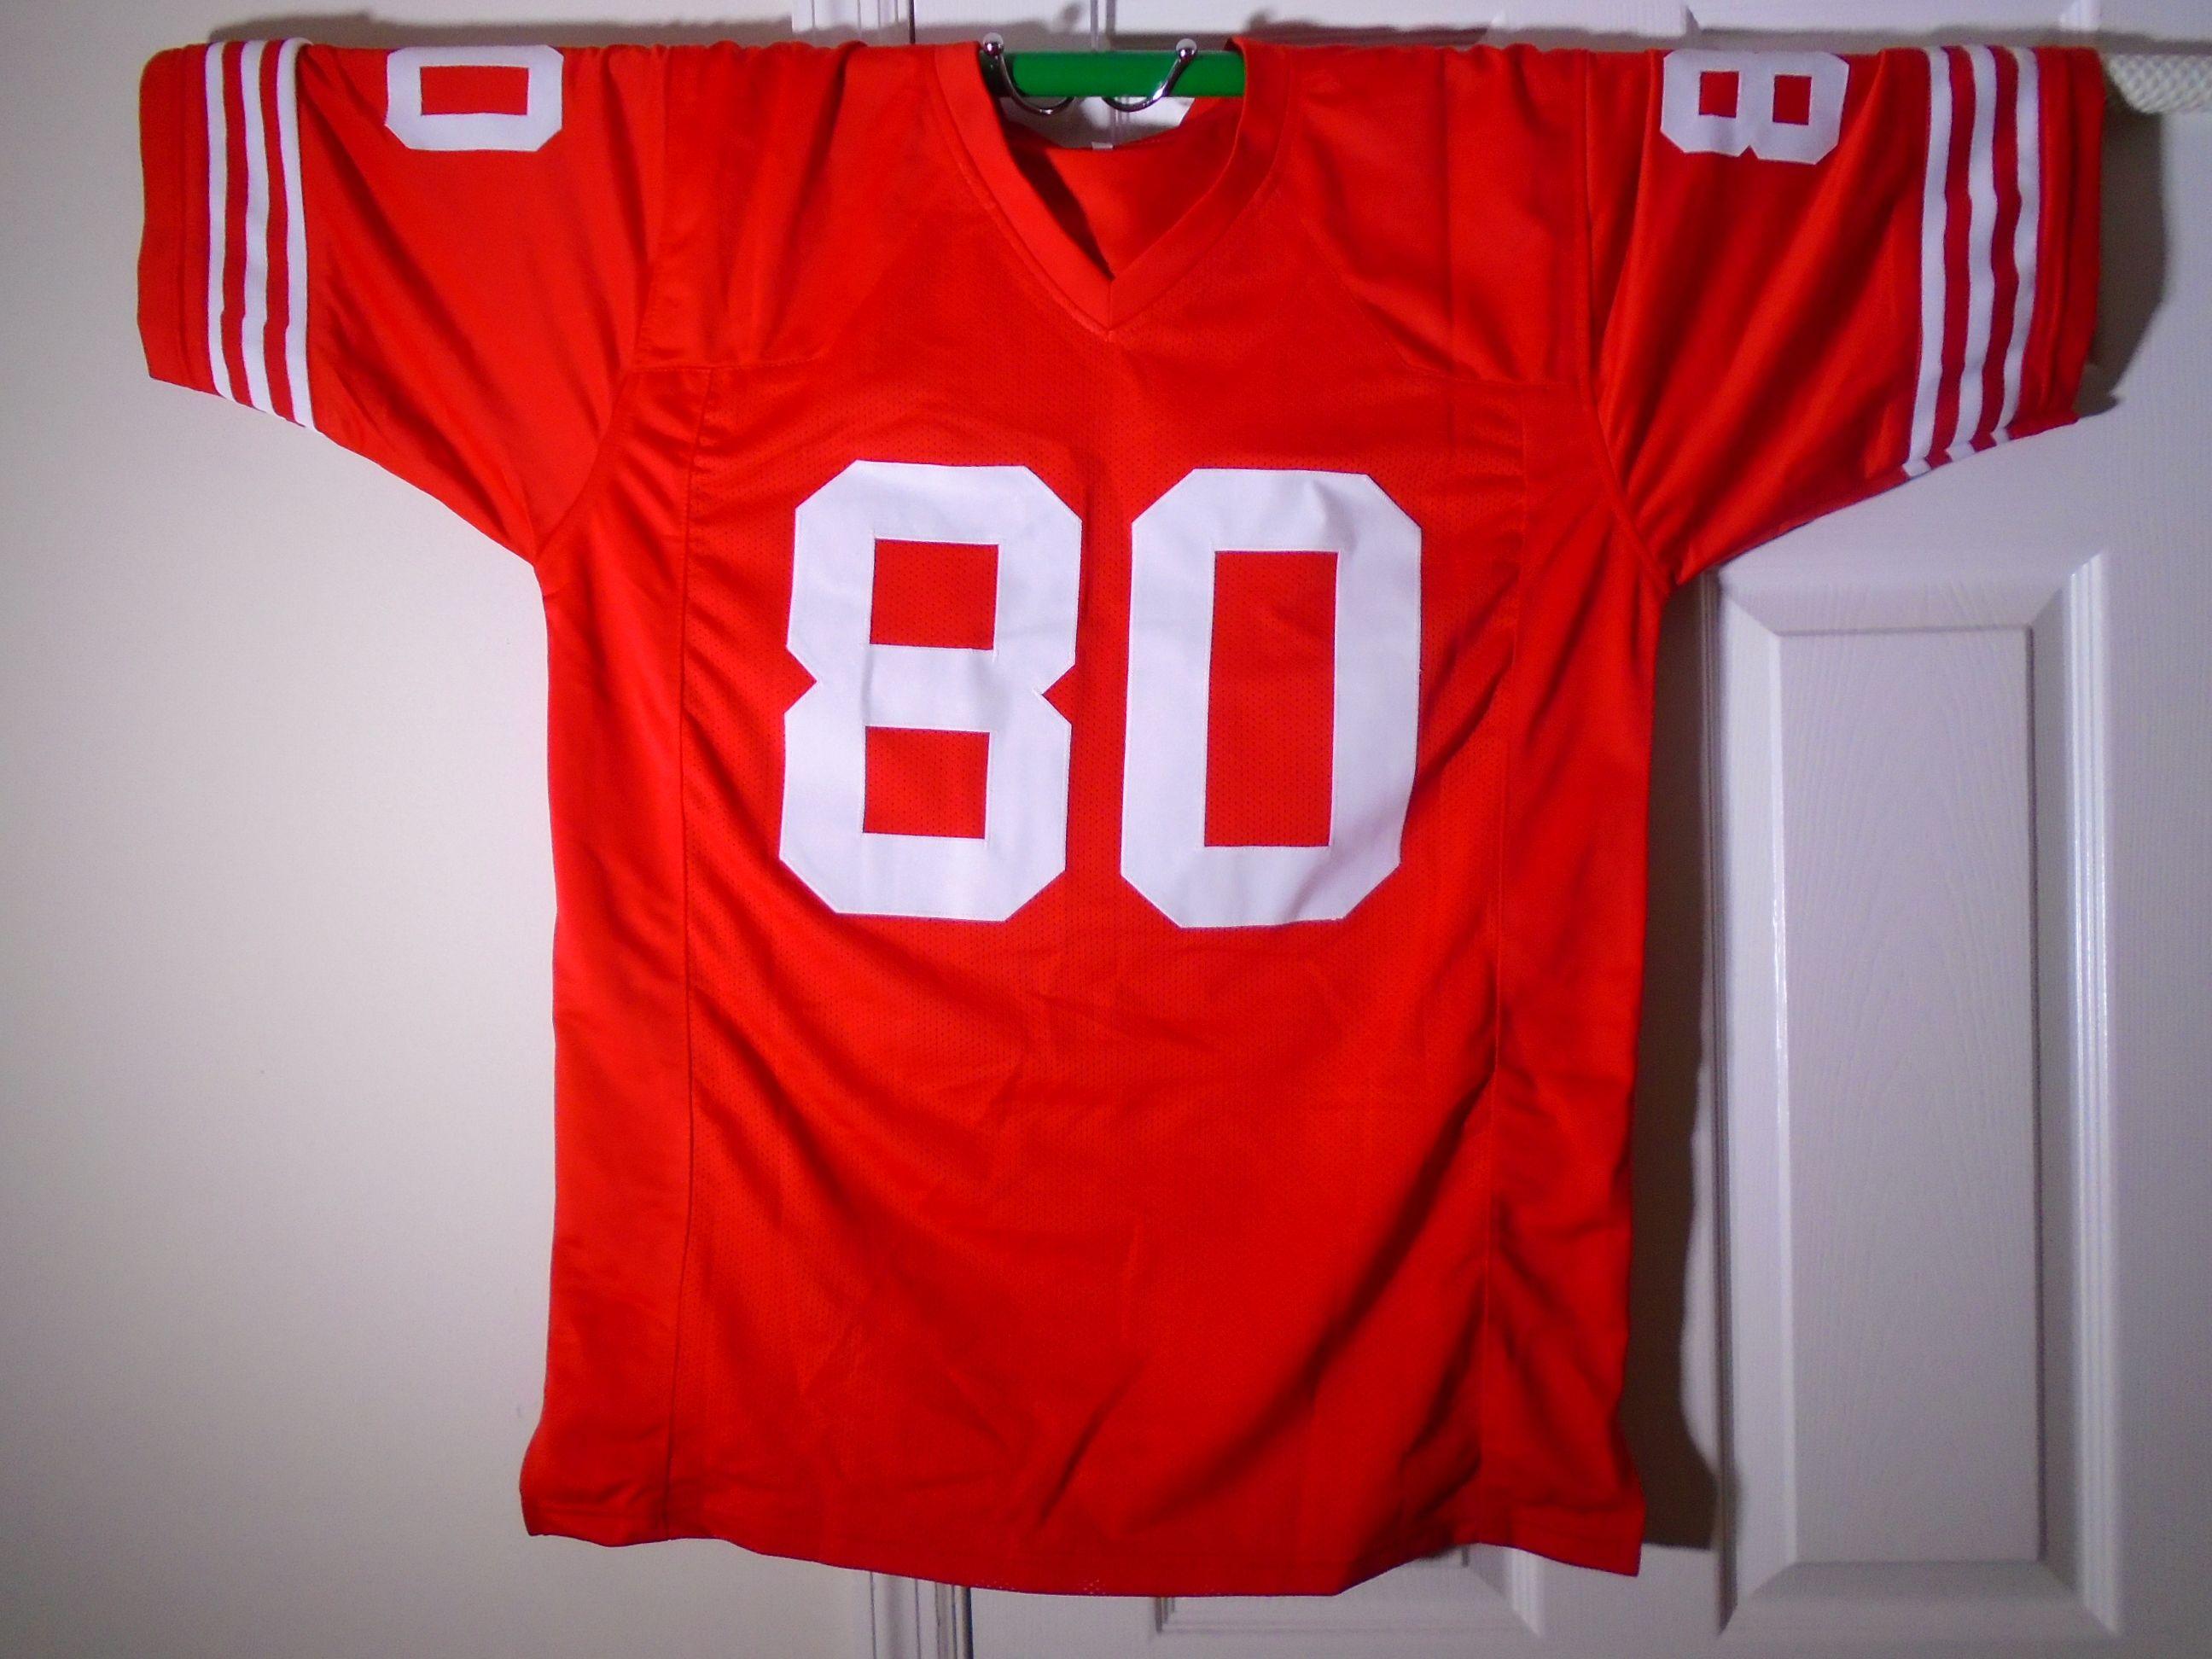 Jerry Rice San Francisco 49ers signed Football jersey.